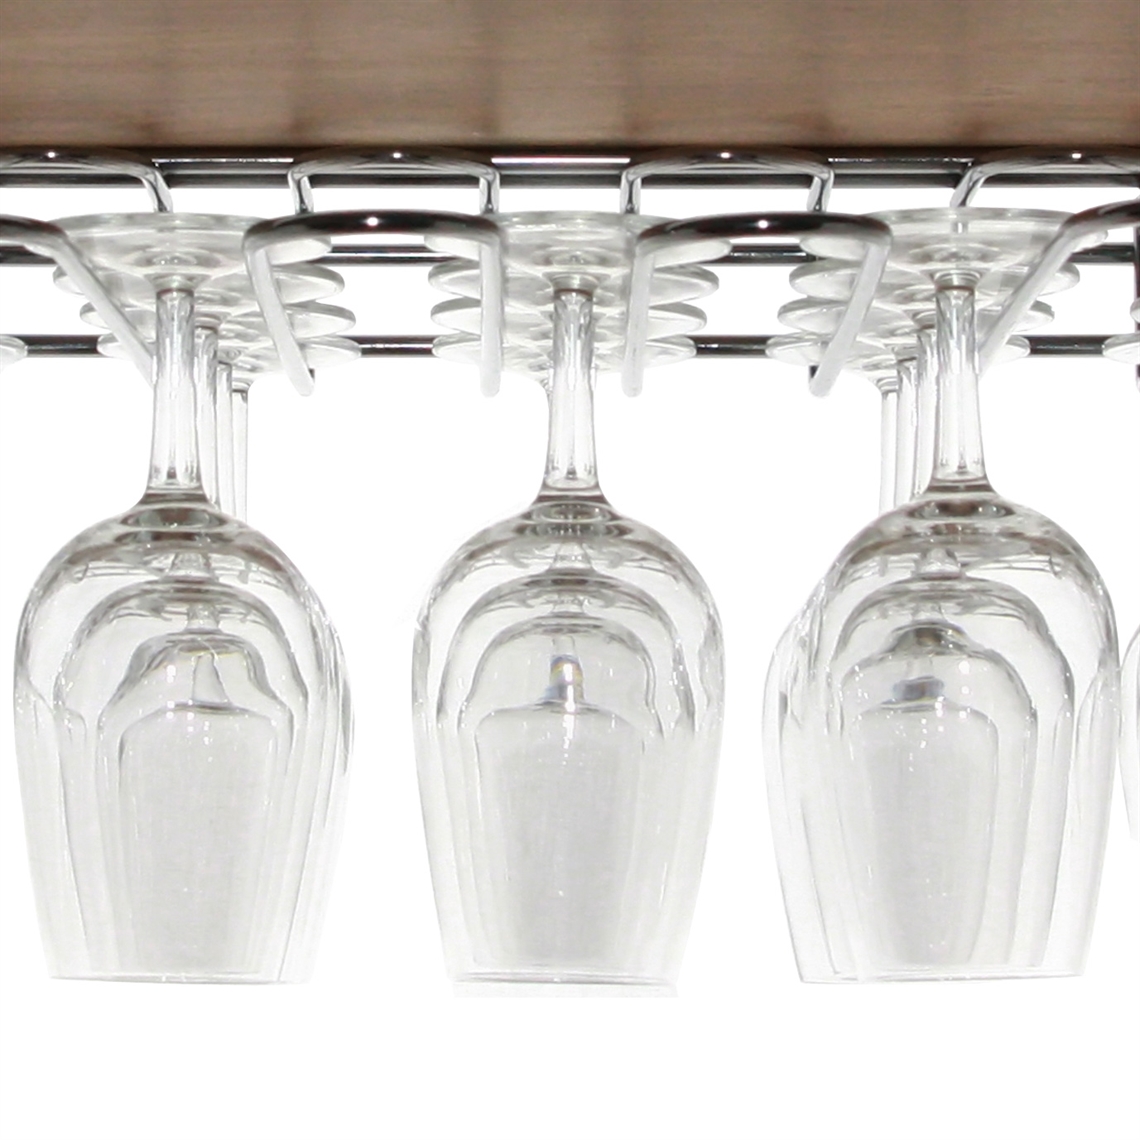 View more glass cleaning accessories from our Wine Glass Hanging Racks range